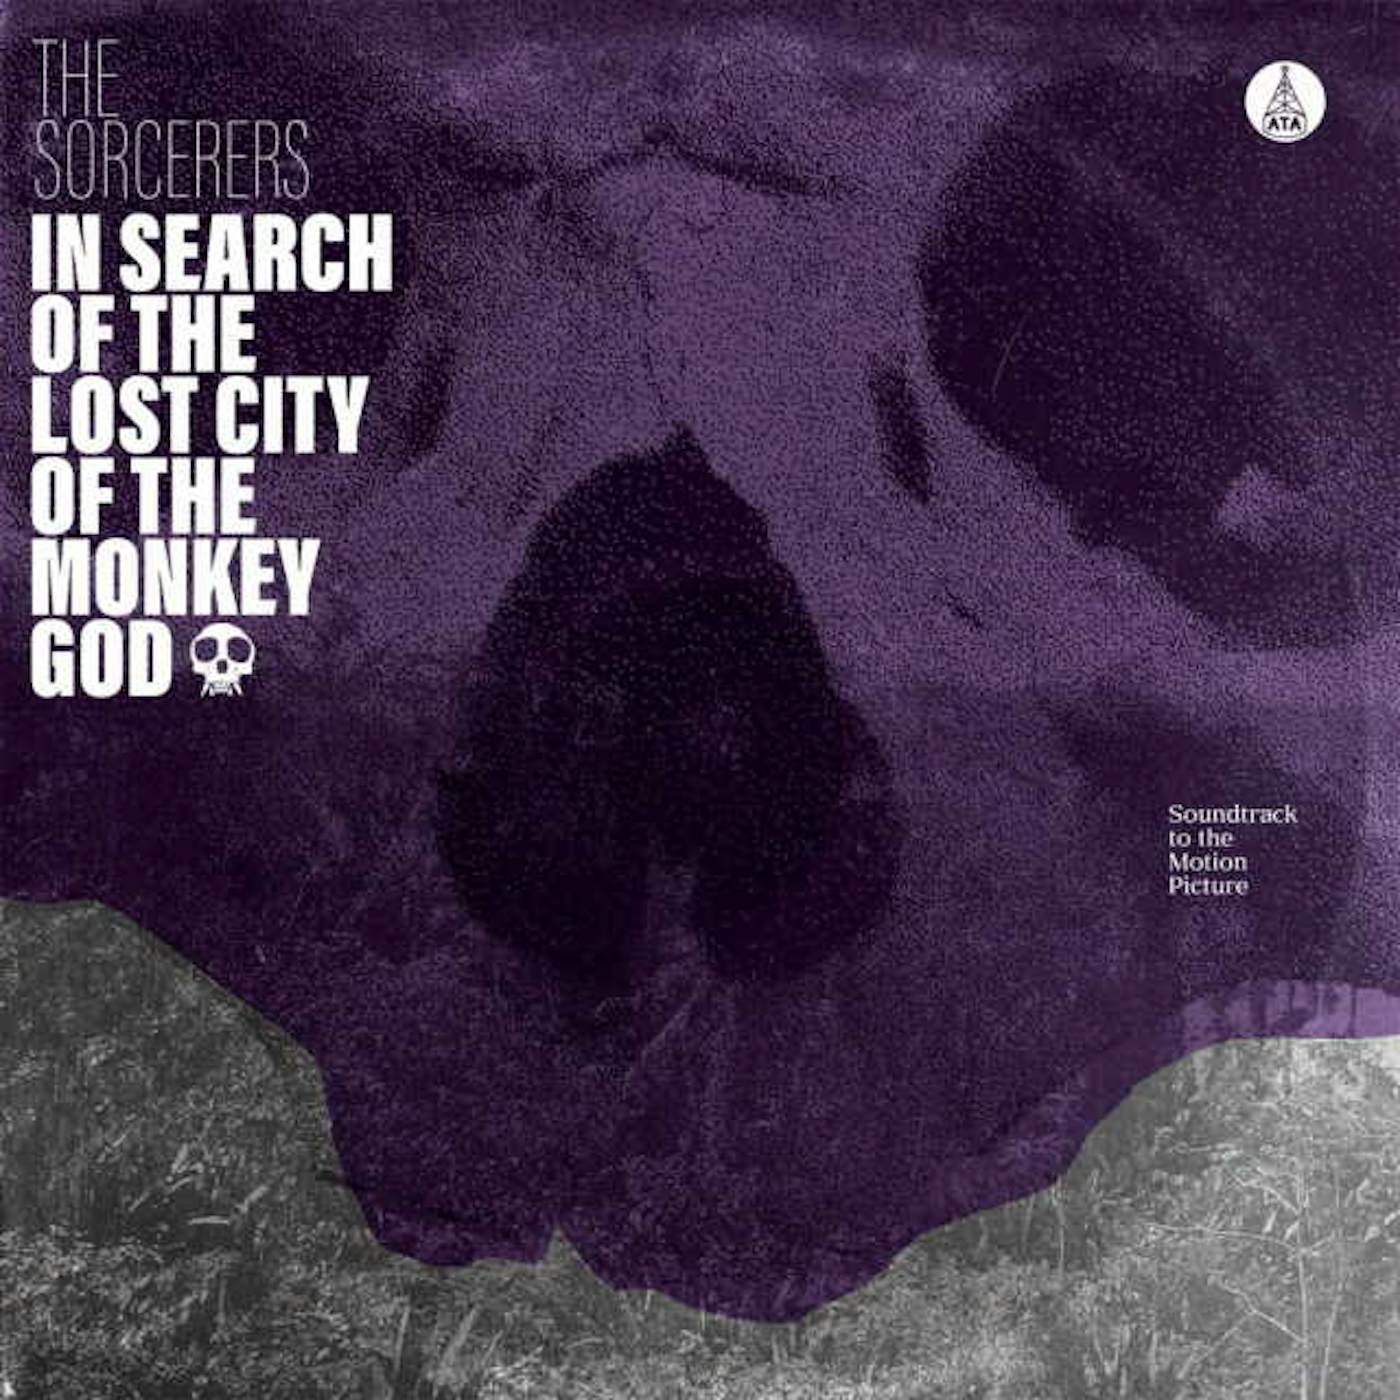 The Sorcerers IN SEARCH OF THE LOST CITY OF THE MONKEY GOD CD